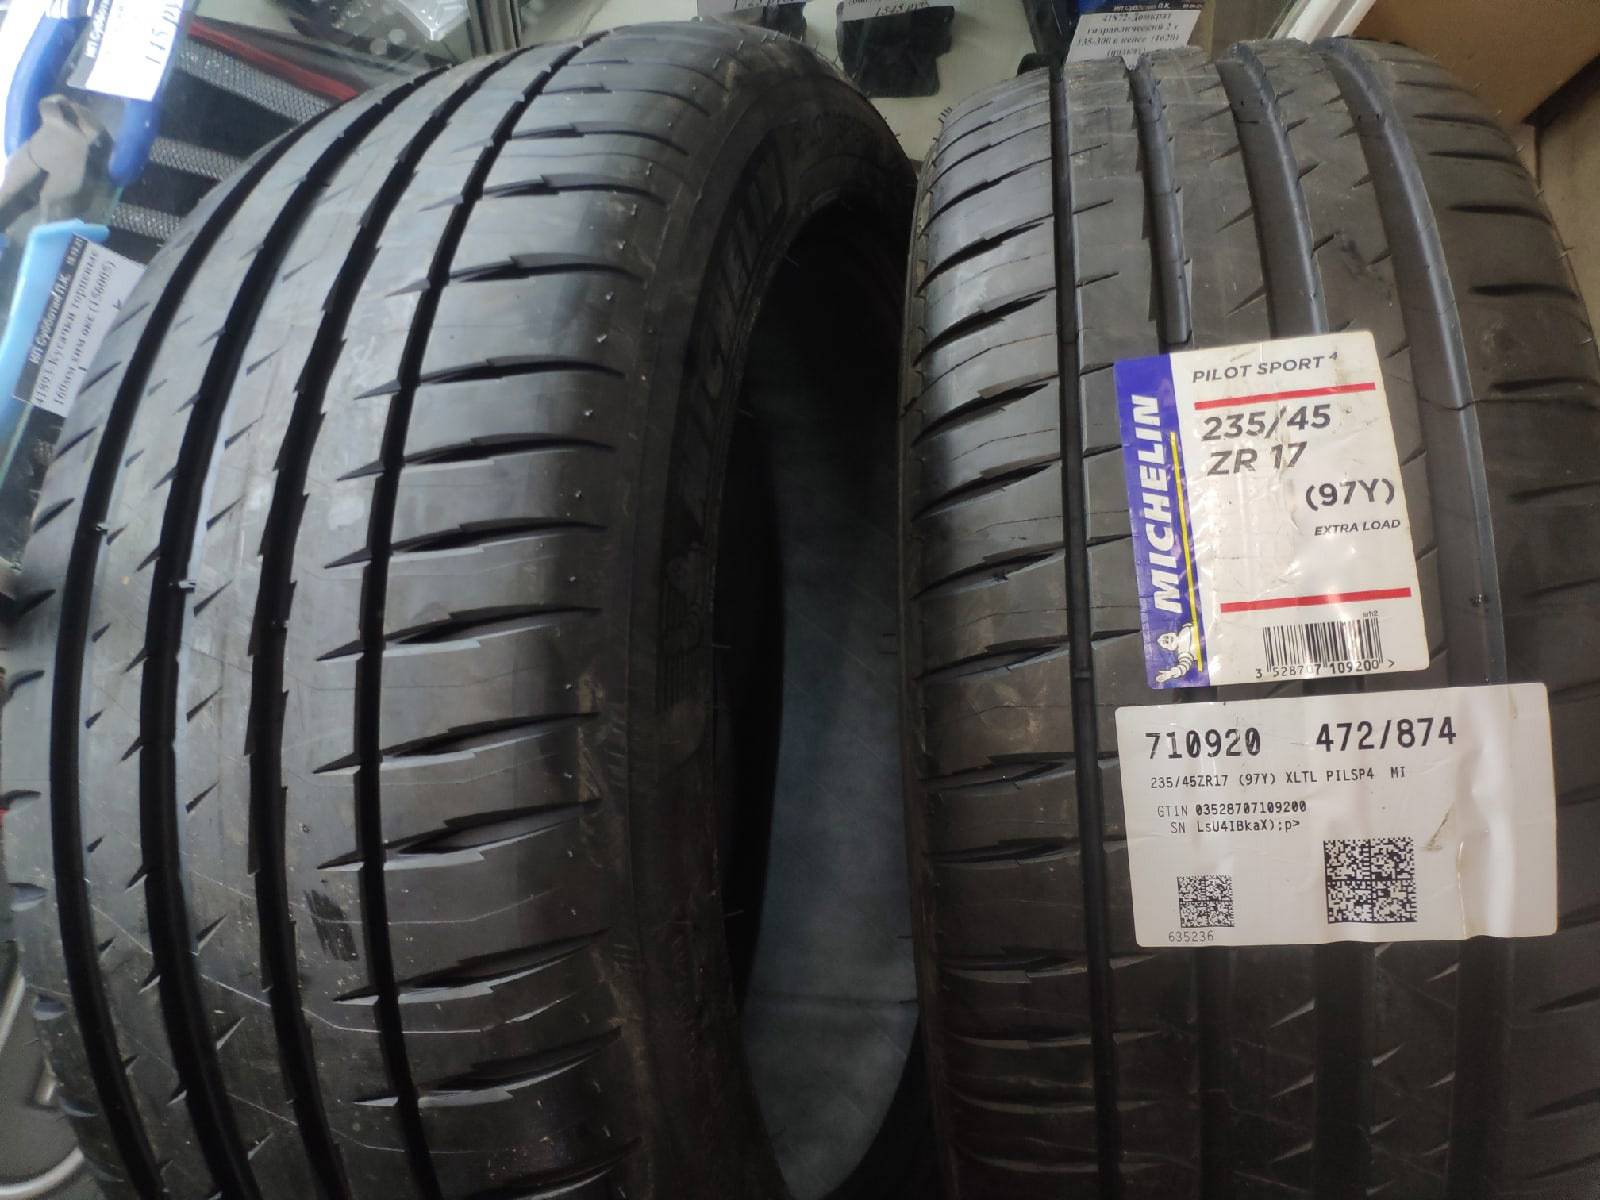 Michelin pilot sport 5 r17. Michelin Pilot Sport 4 235/45 r18 Label. Резина Michelin 265 35 r18 97y Extra load m+s лето. Michelin Pilot Sport 4 SUV 275 35 22. 235 45 17 Лето King Boss.